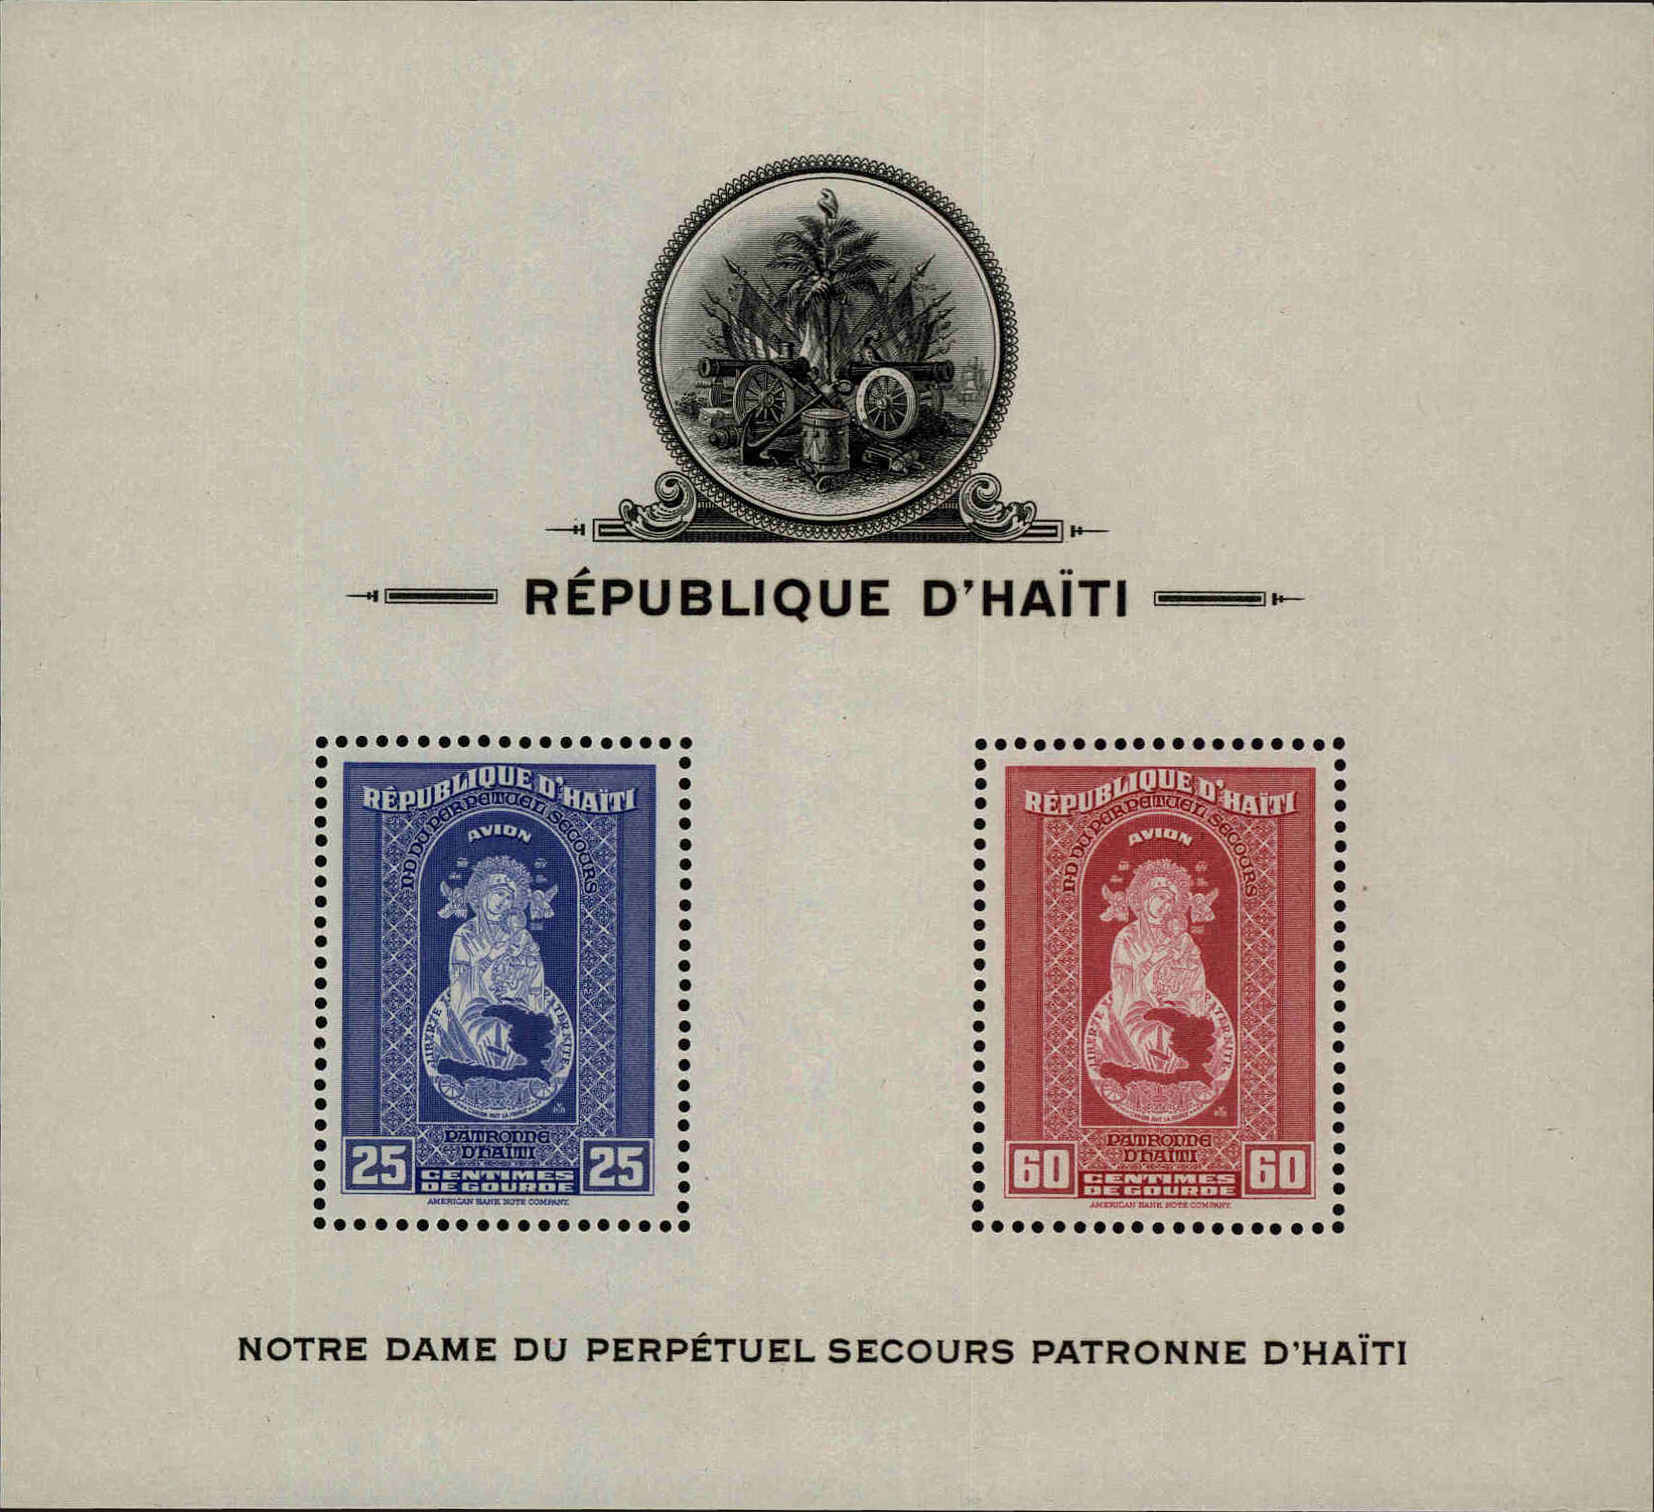 Front view of Haiti C20 collectors stamp